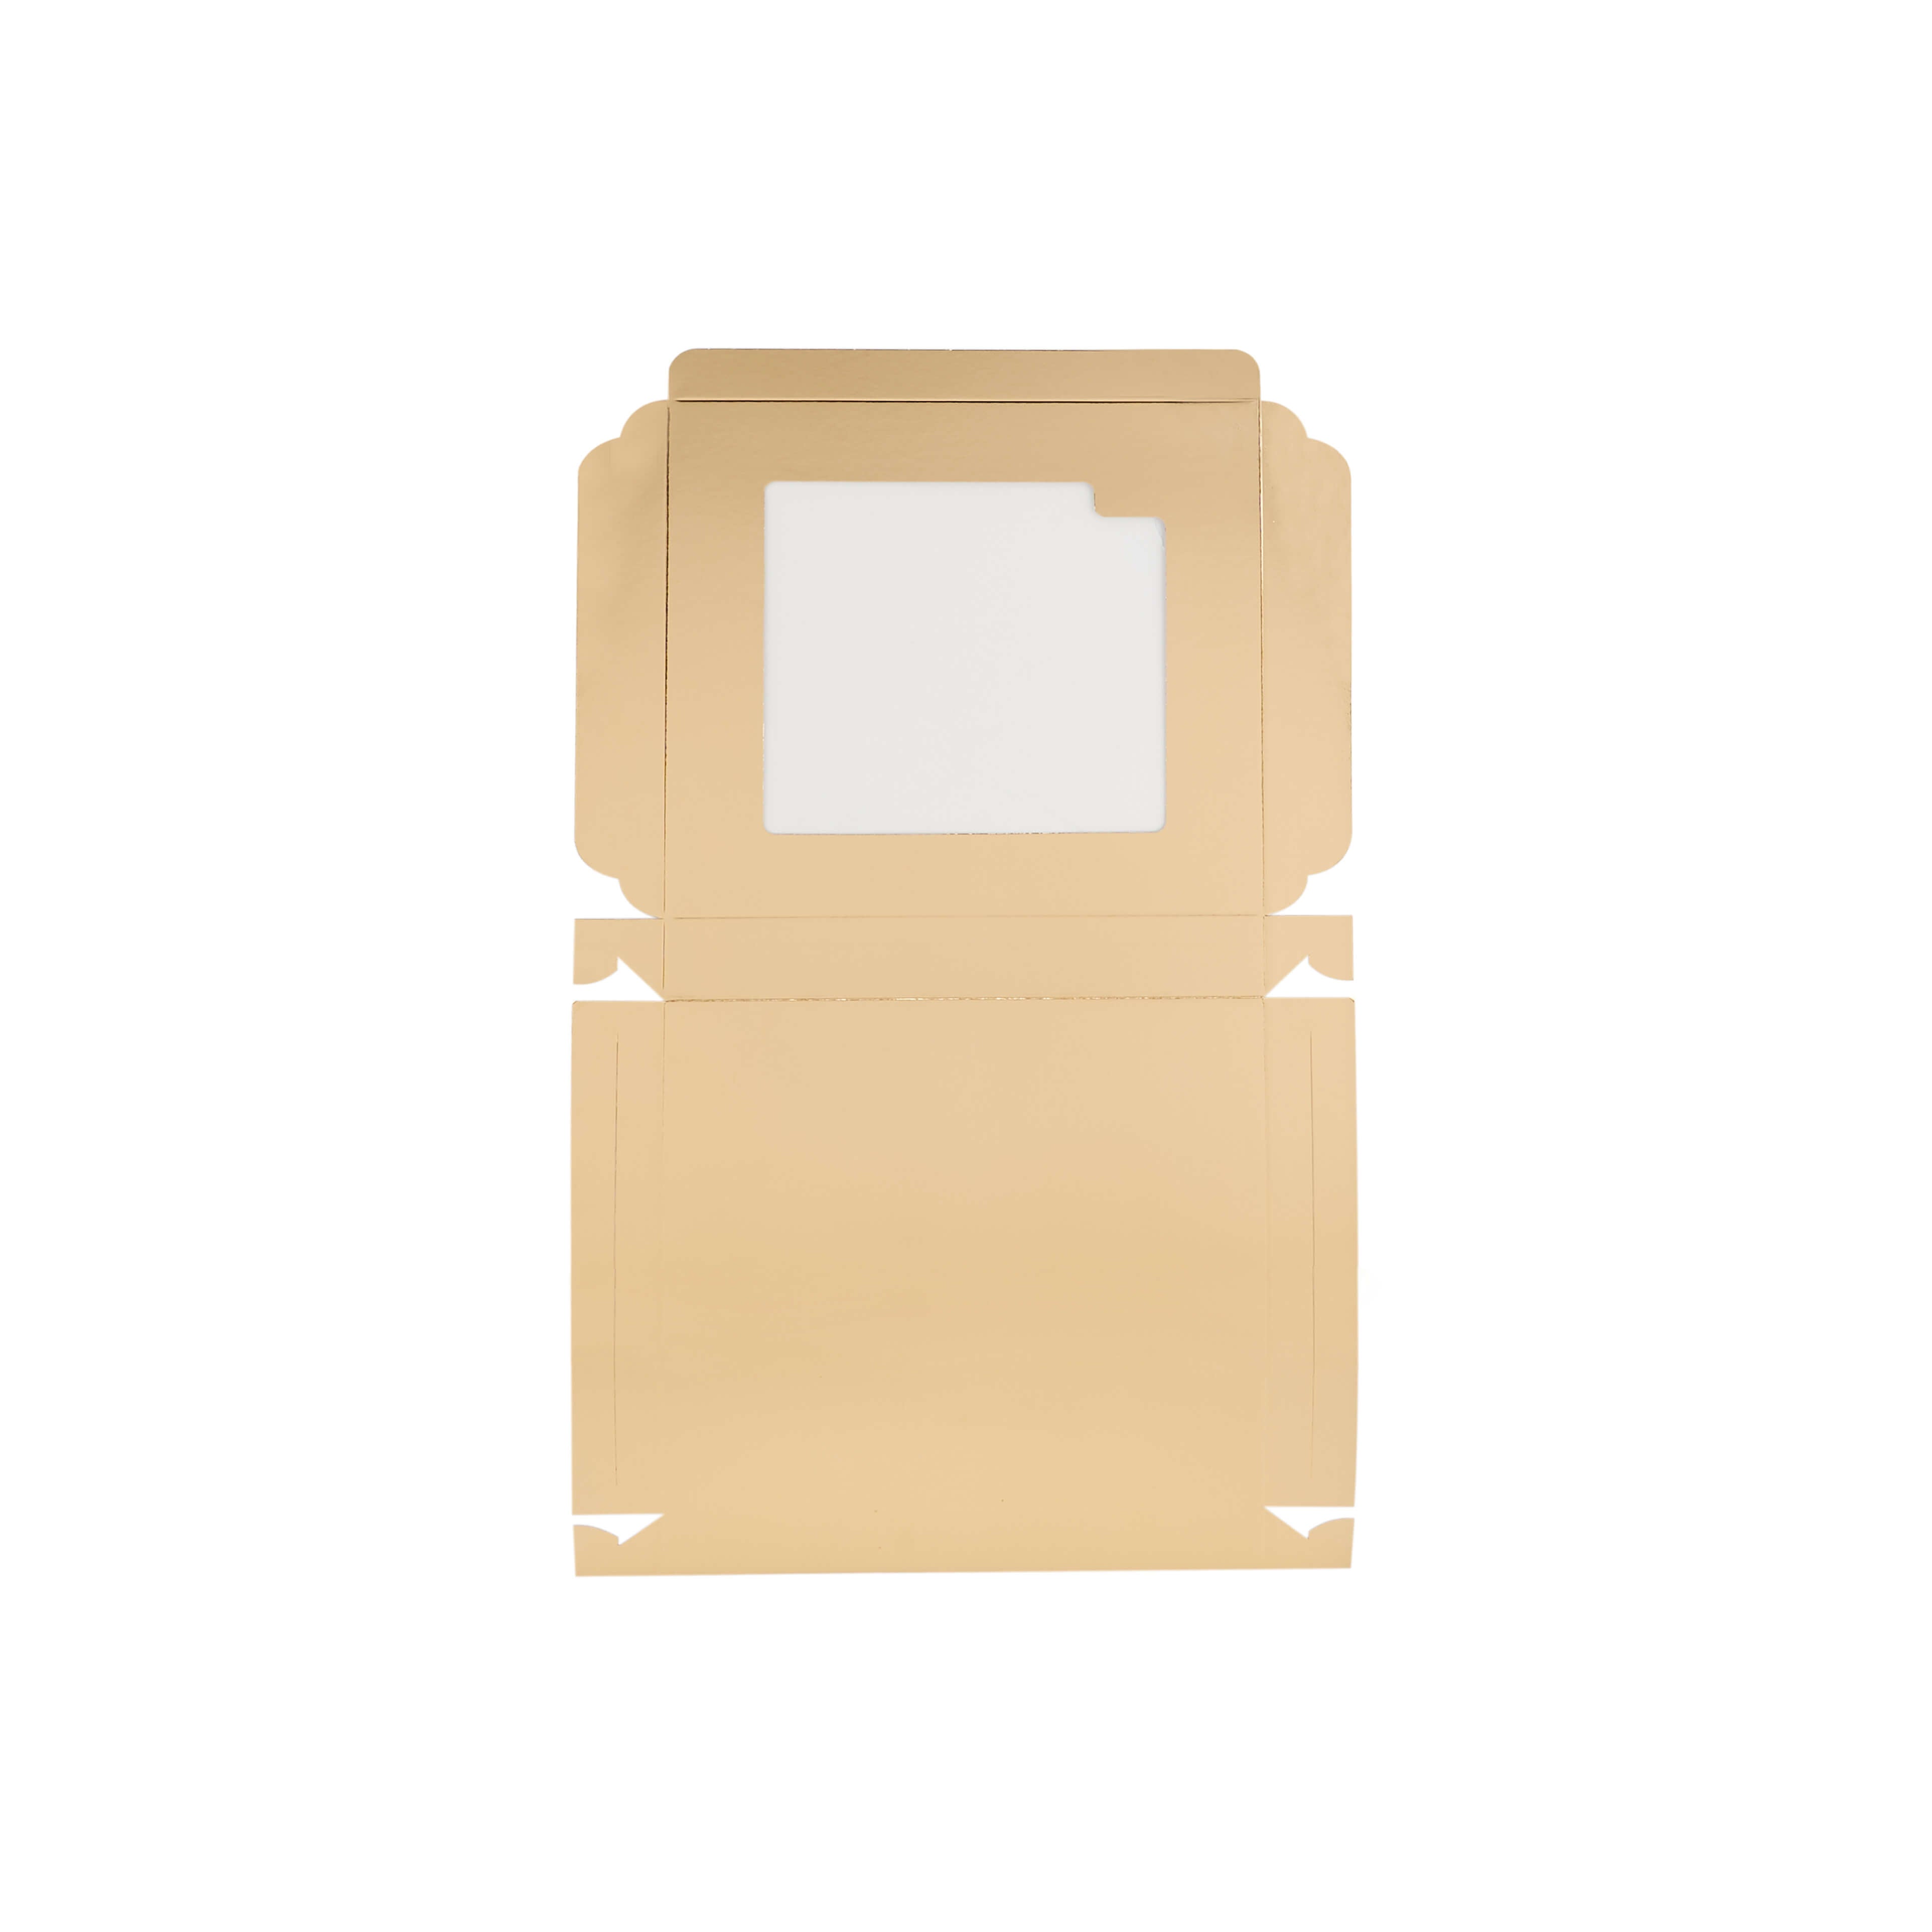 25x25 cm Gold Sweet Box with window - Hotpack Global